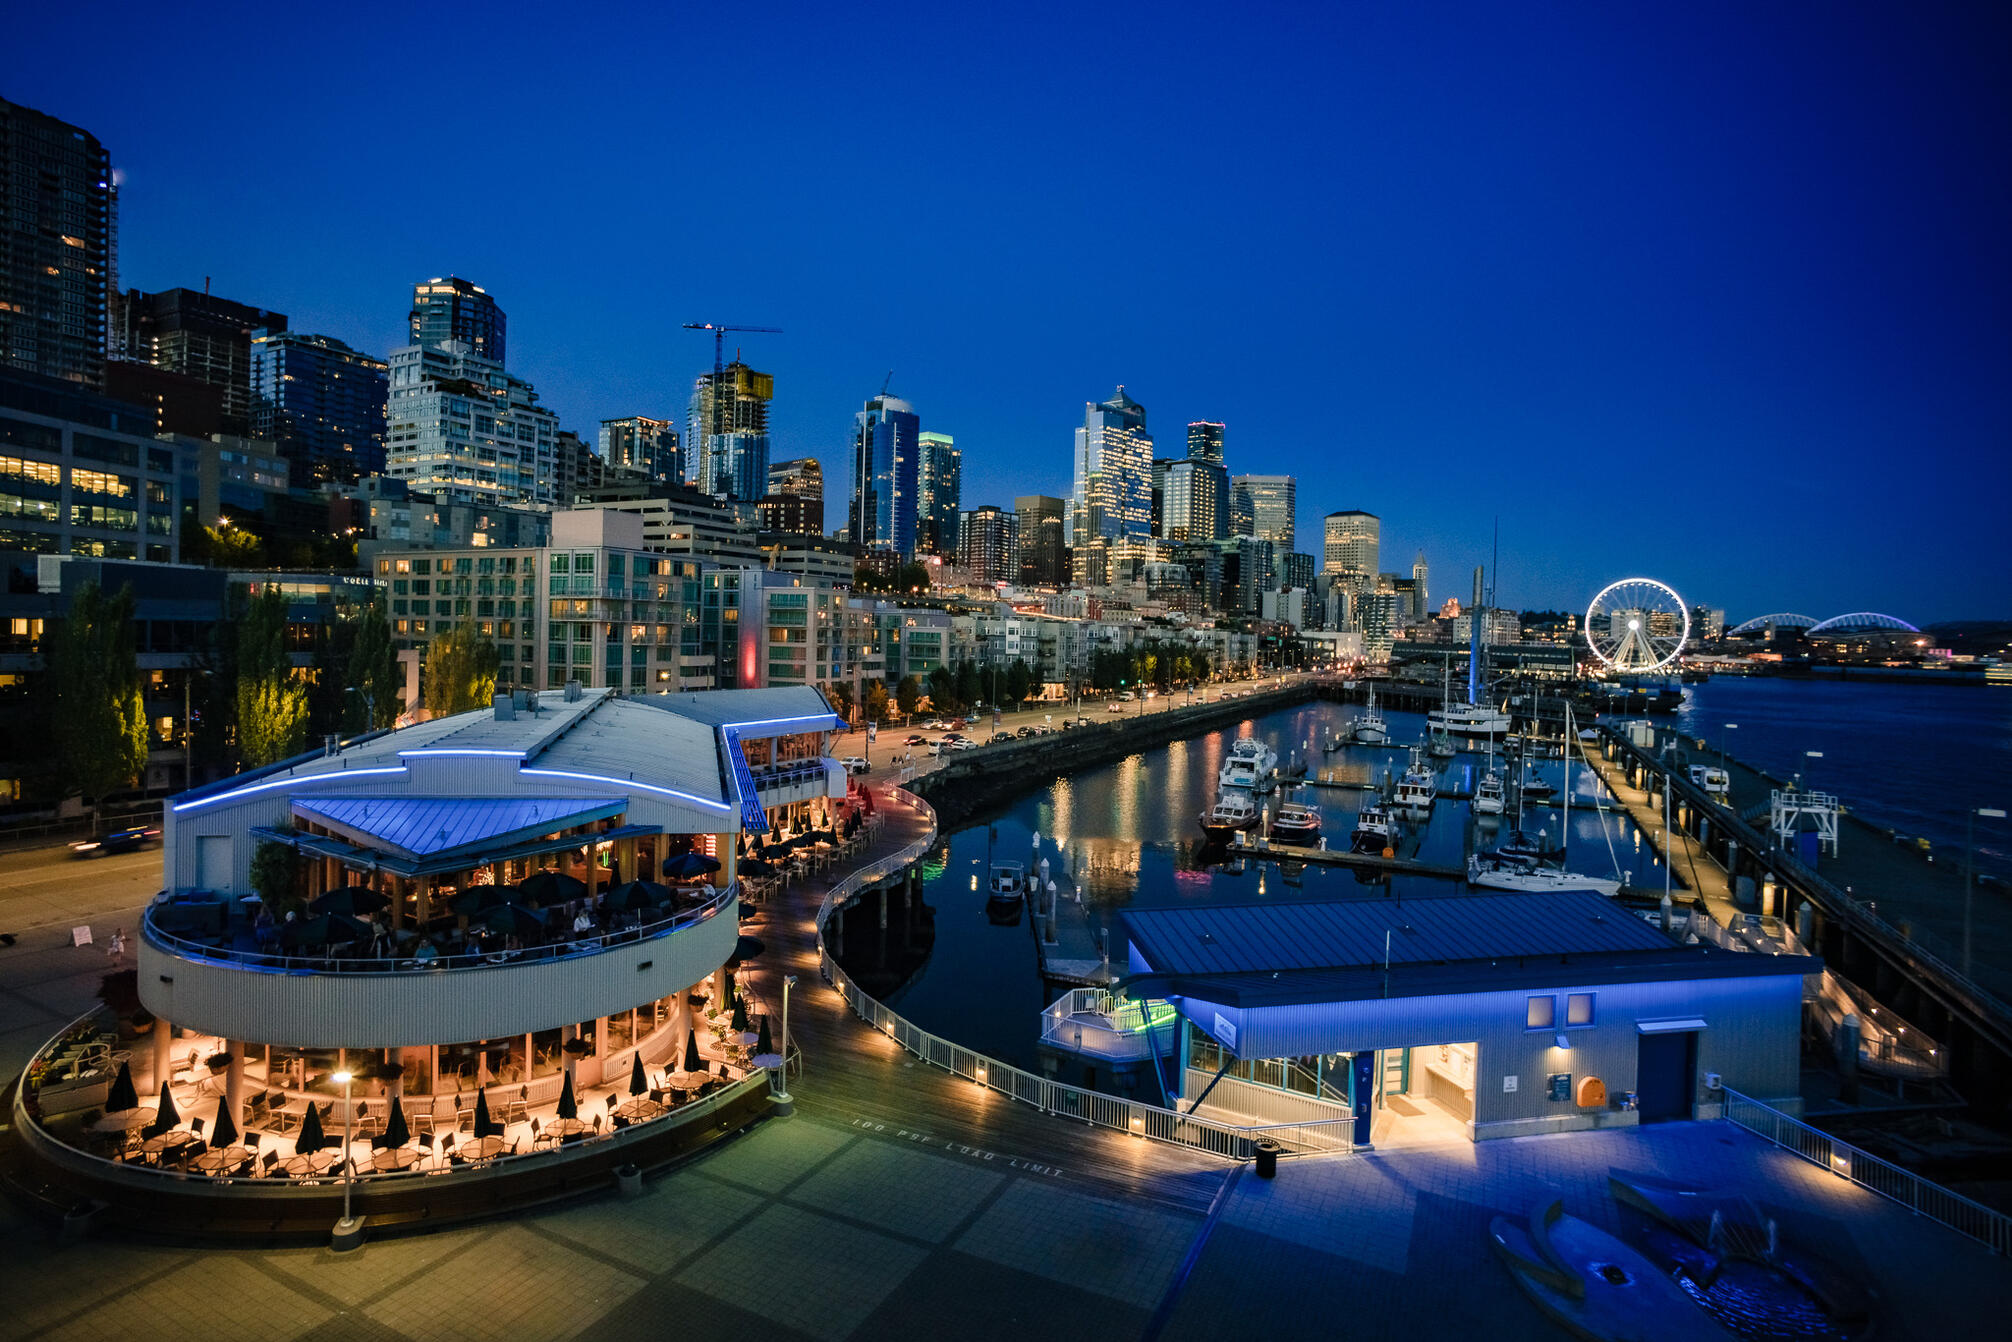 A scenic overlook in Seattle Washington over waterside restaurant and entertainment district.